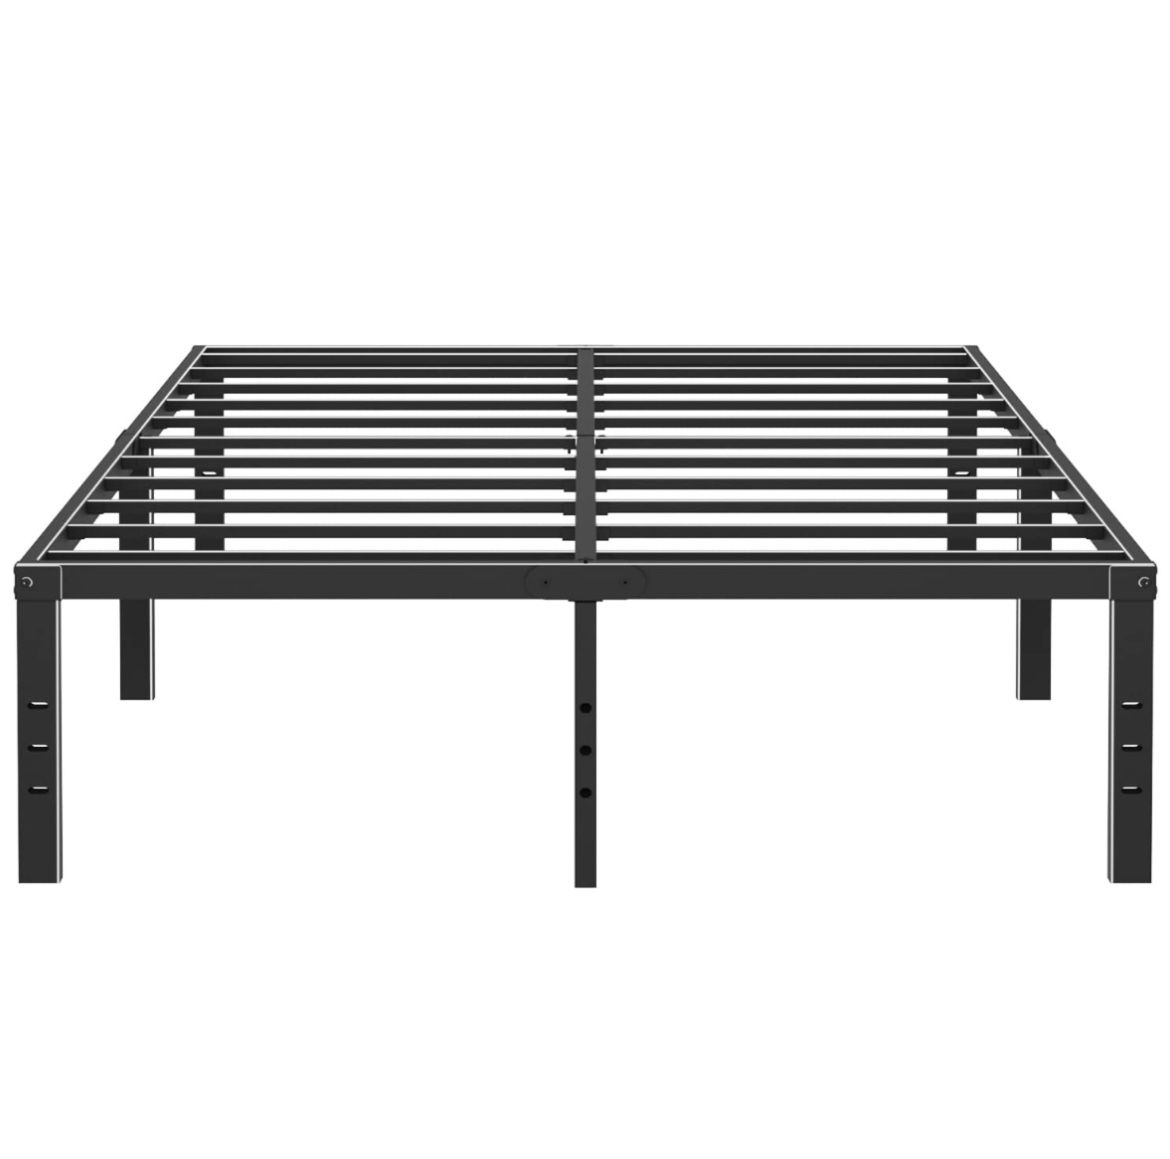 16” QUEEN SIZE BED FRAME